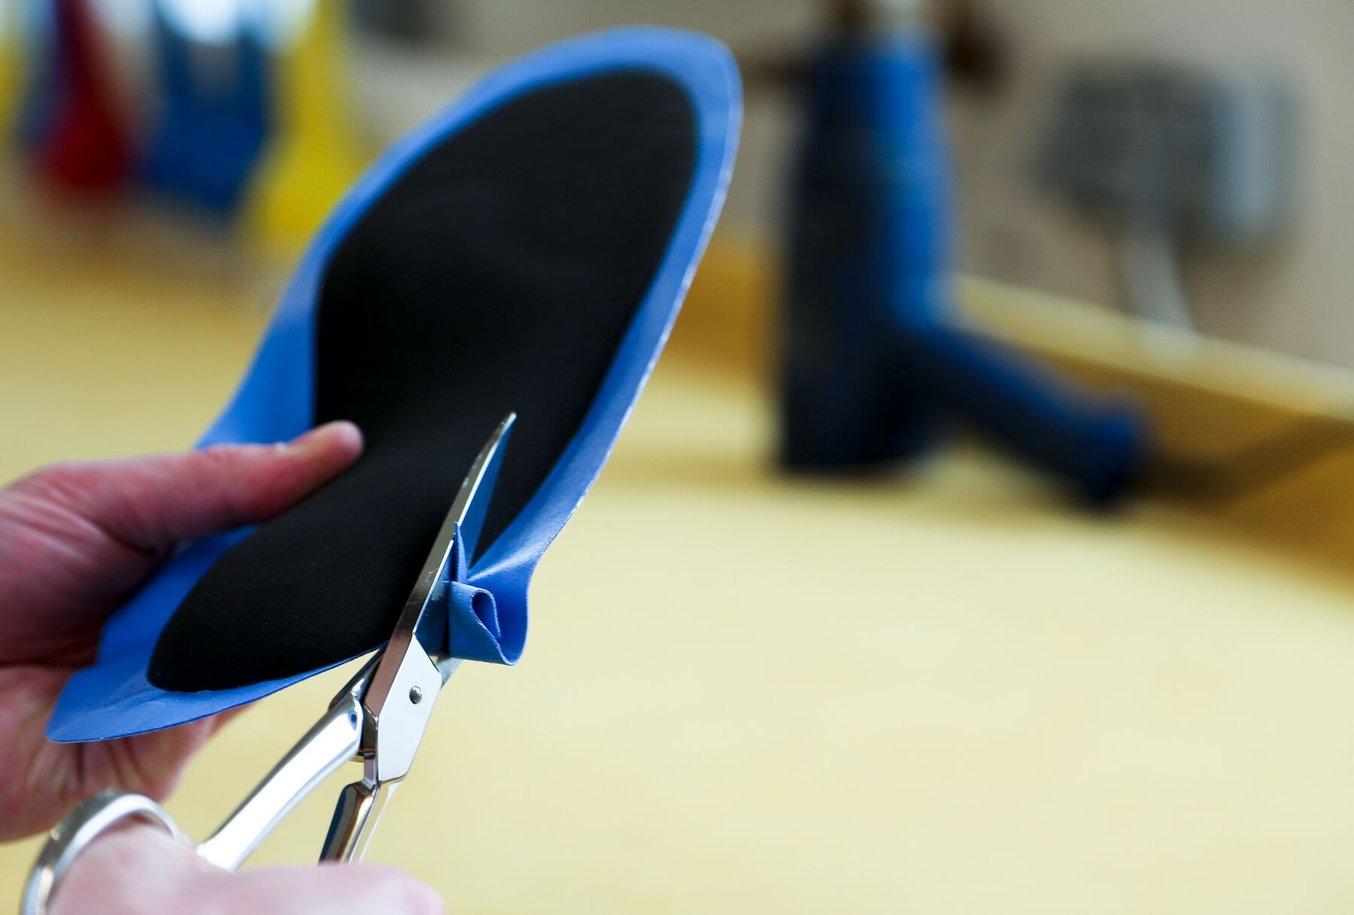 The 3D printed insoles